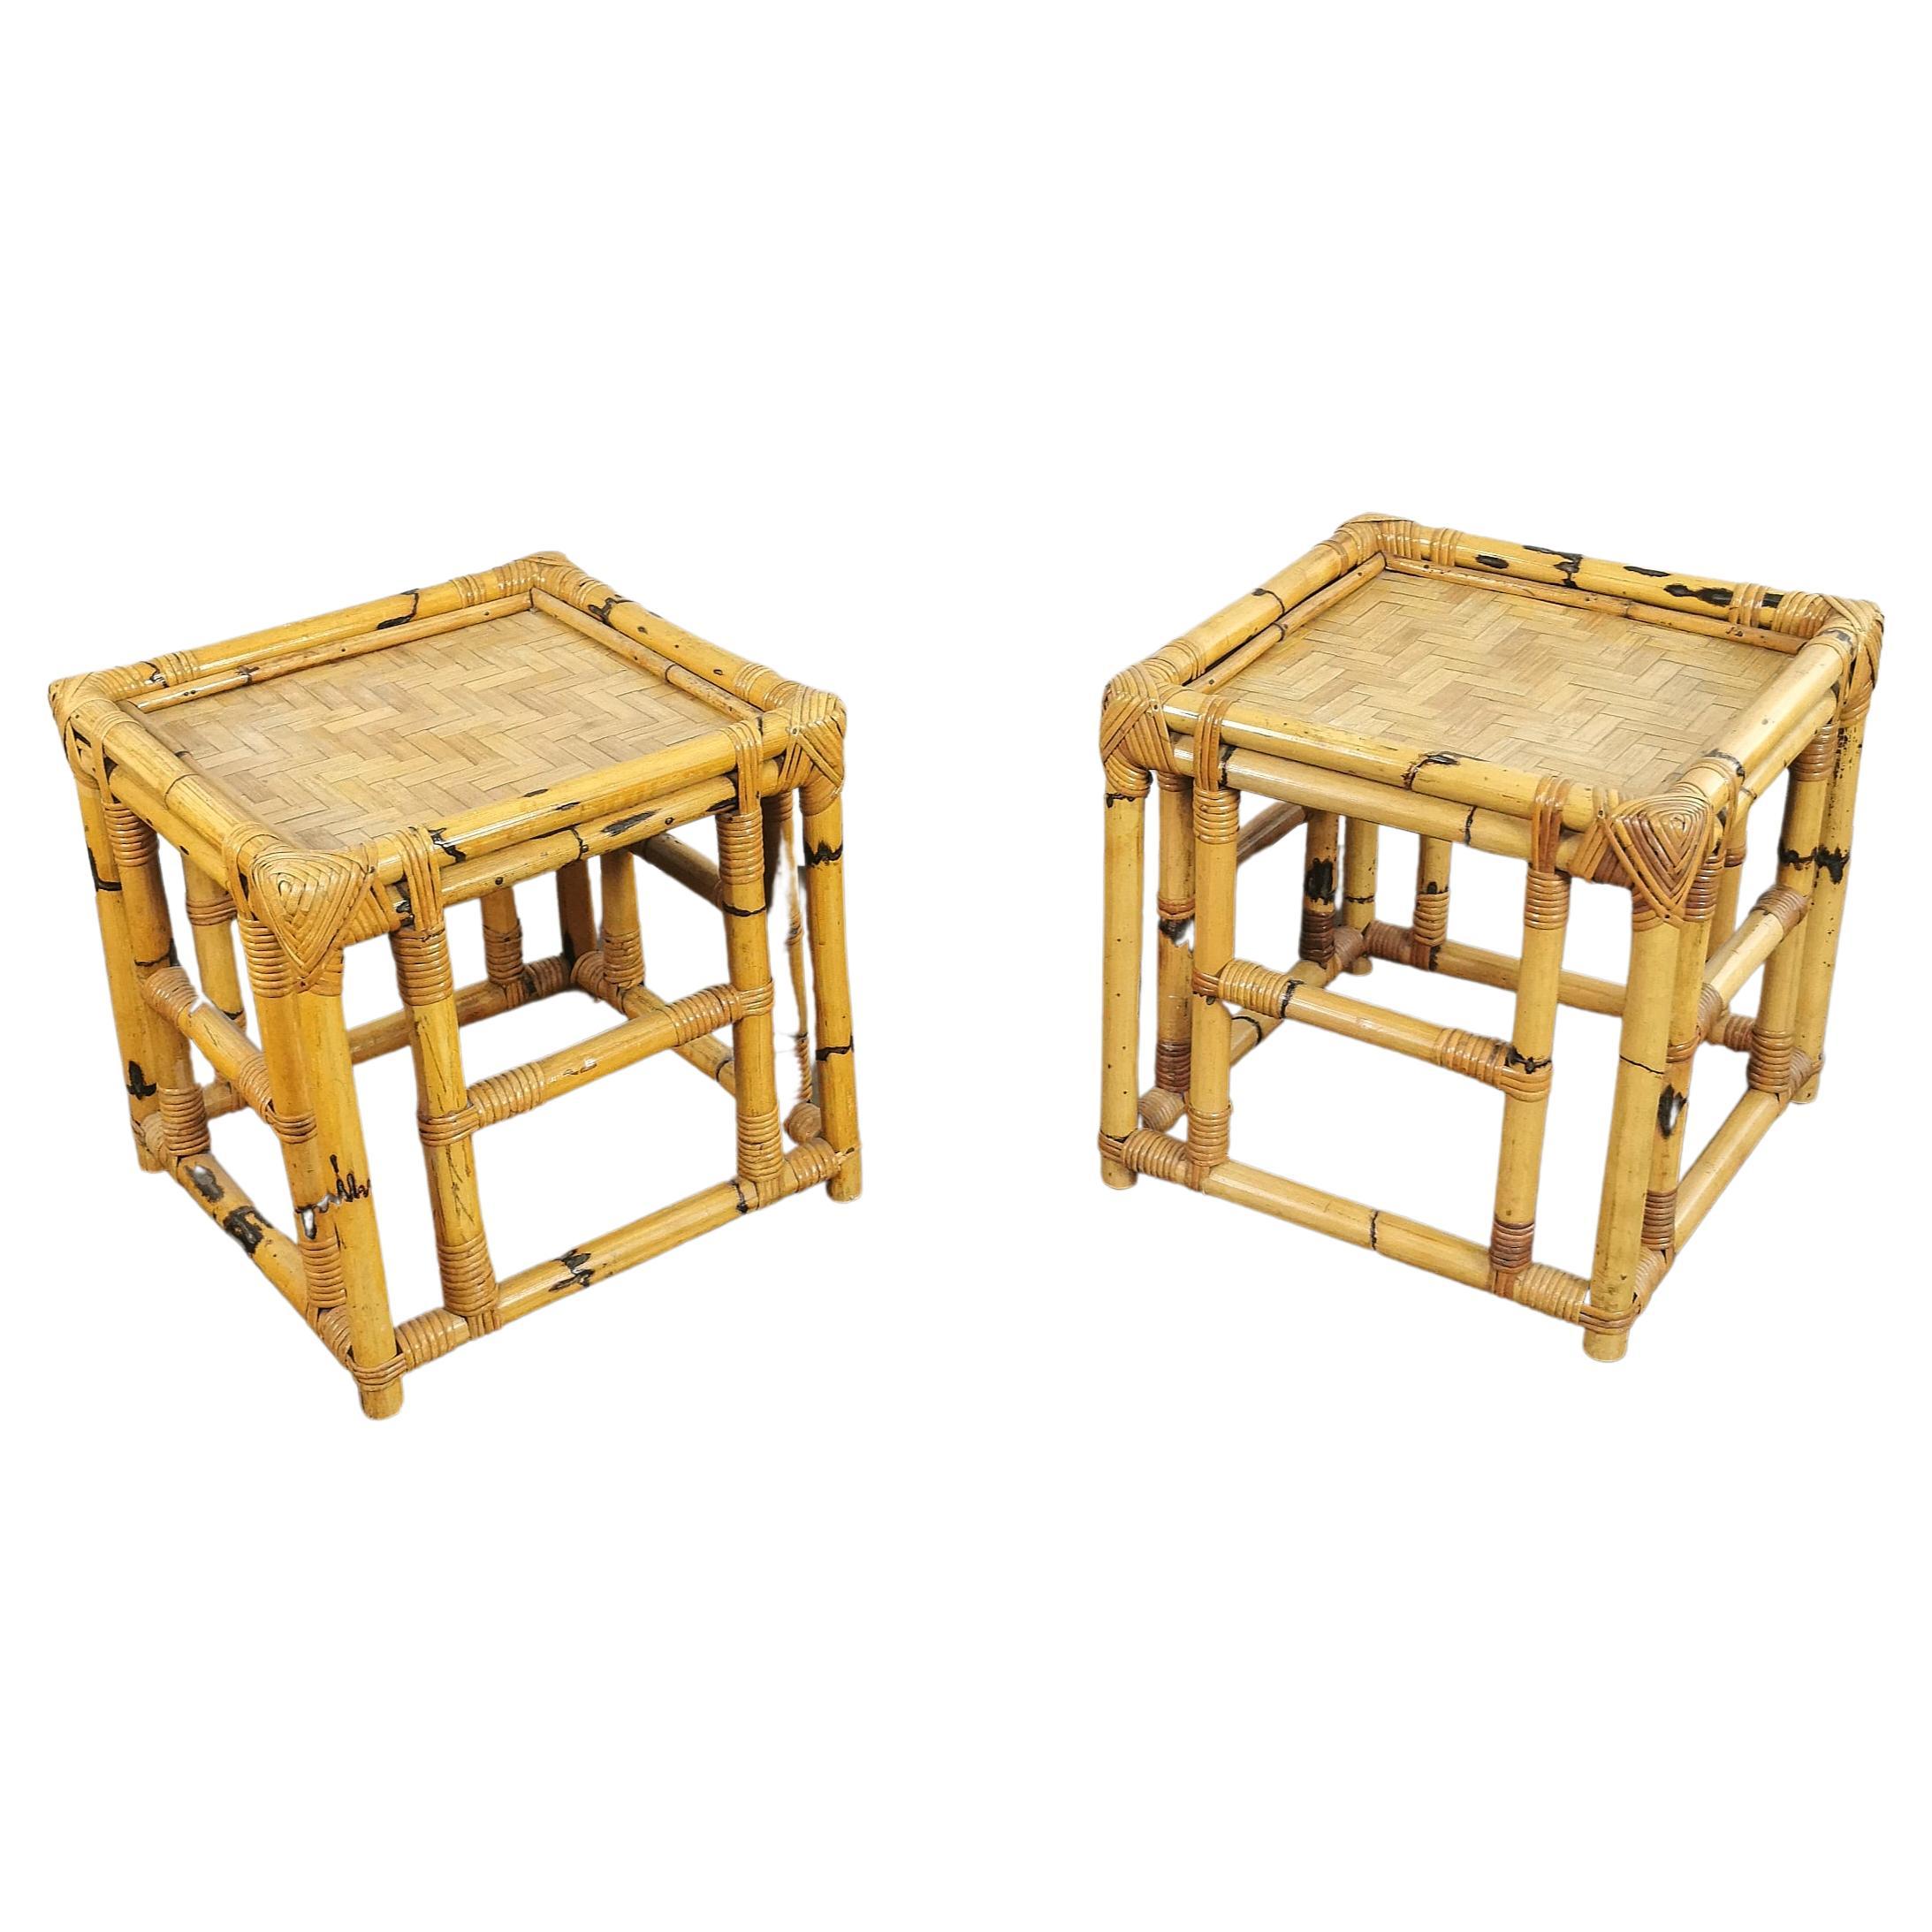 Pair of Coffee Tables Bamboo Cubic Vivai del Sud Midcentury Modern Italy 1970s 